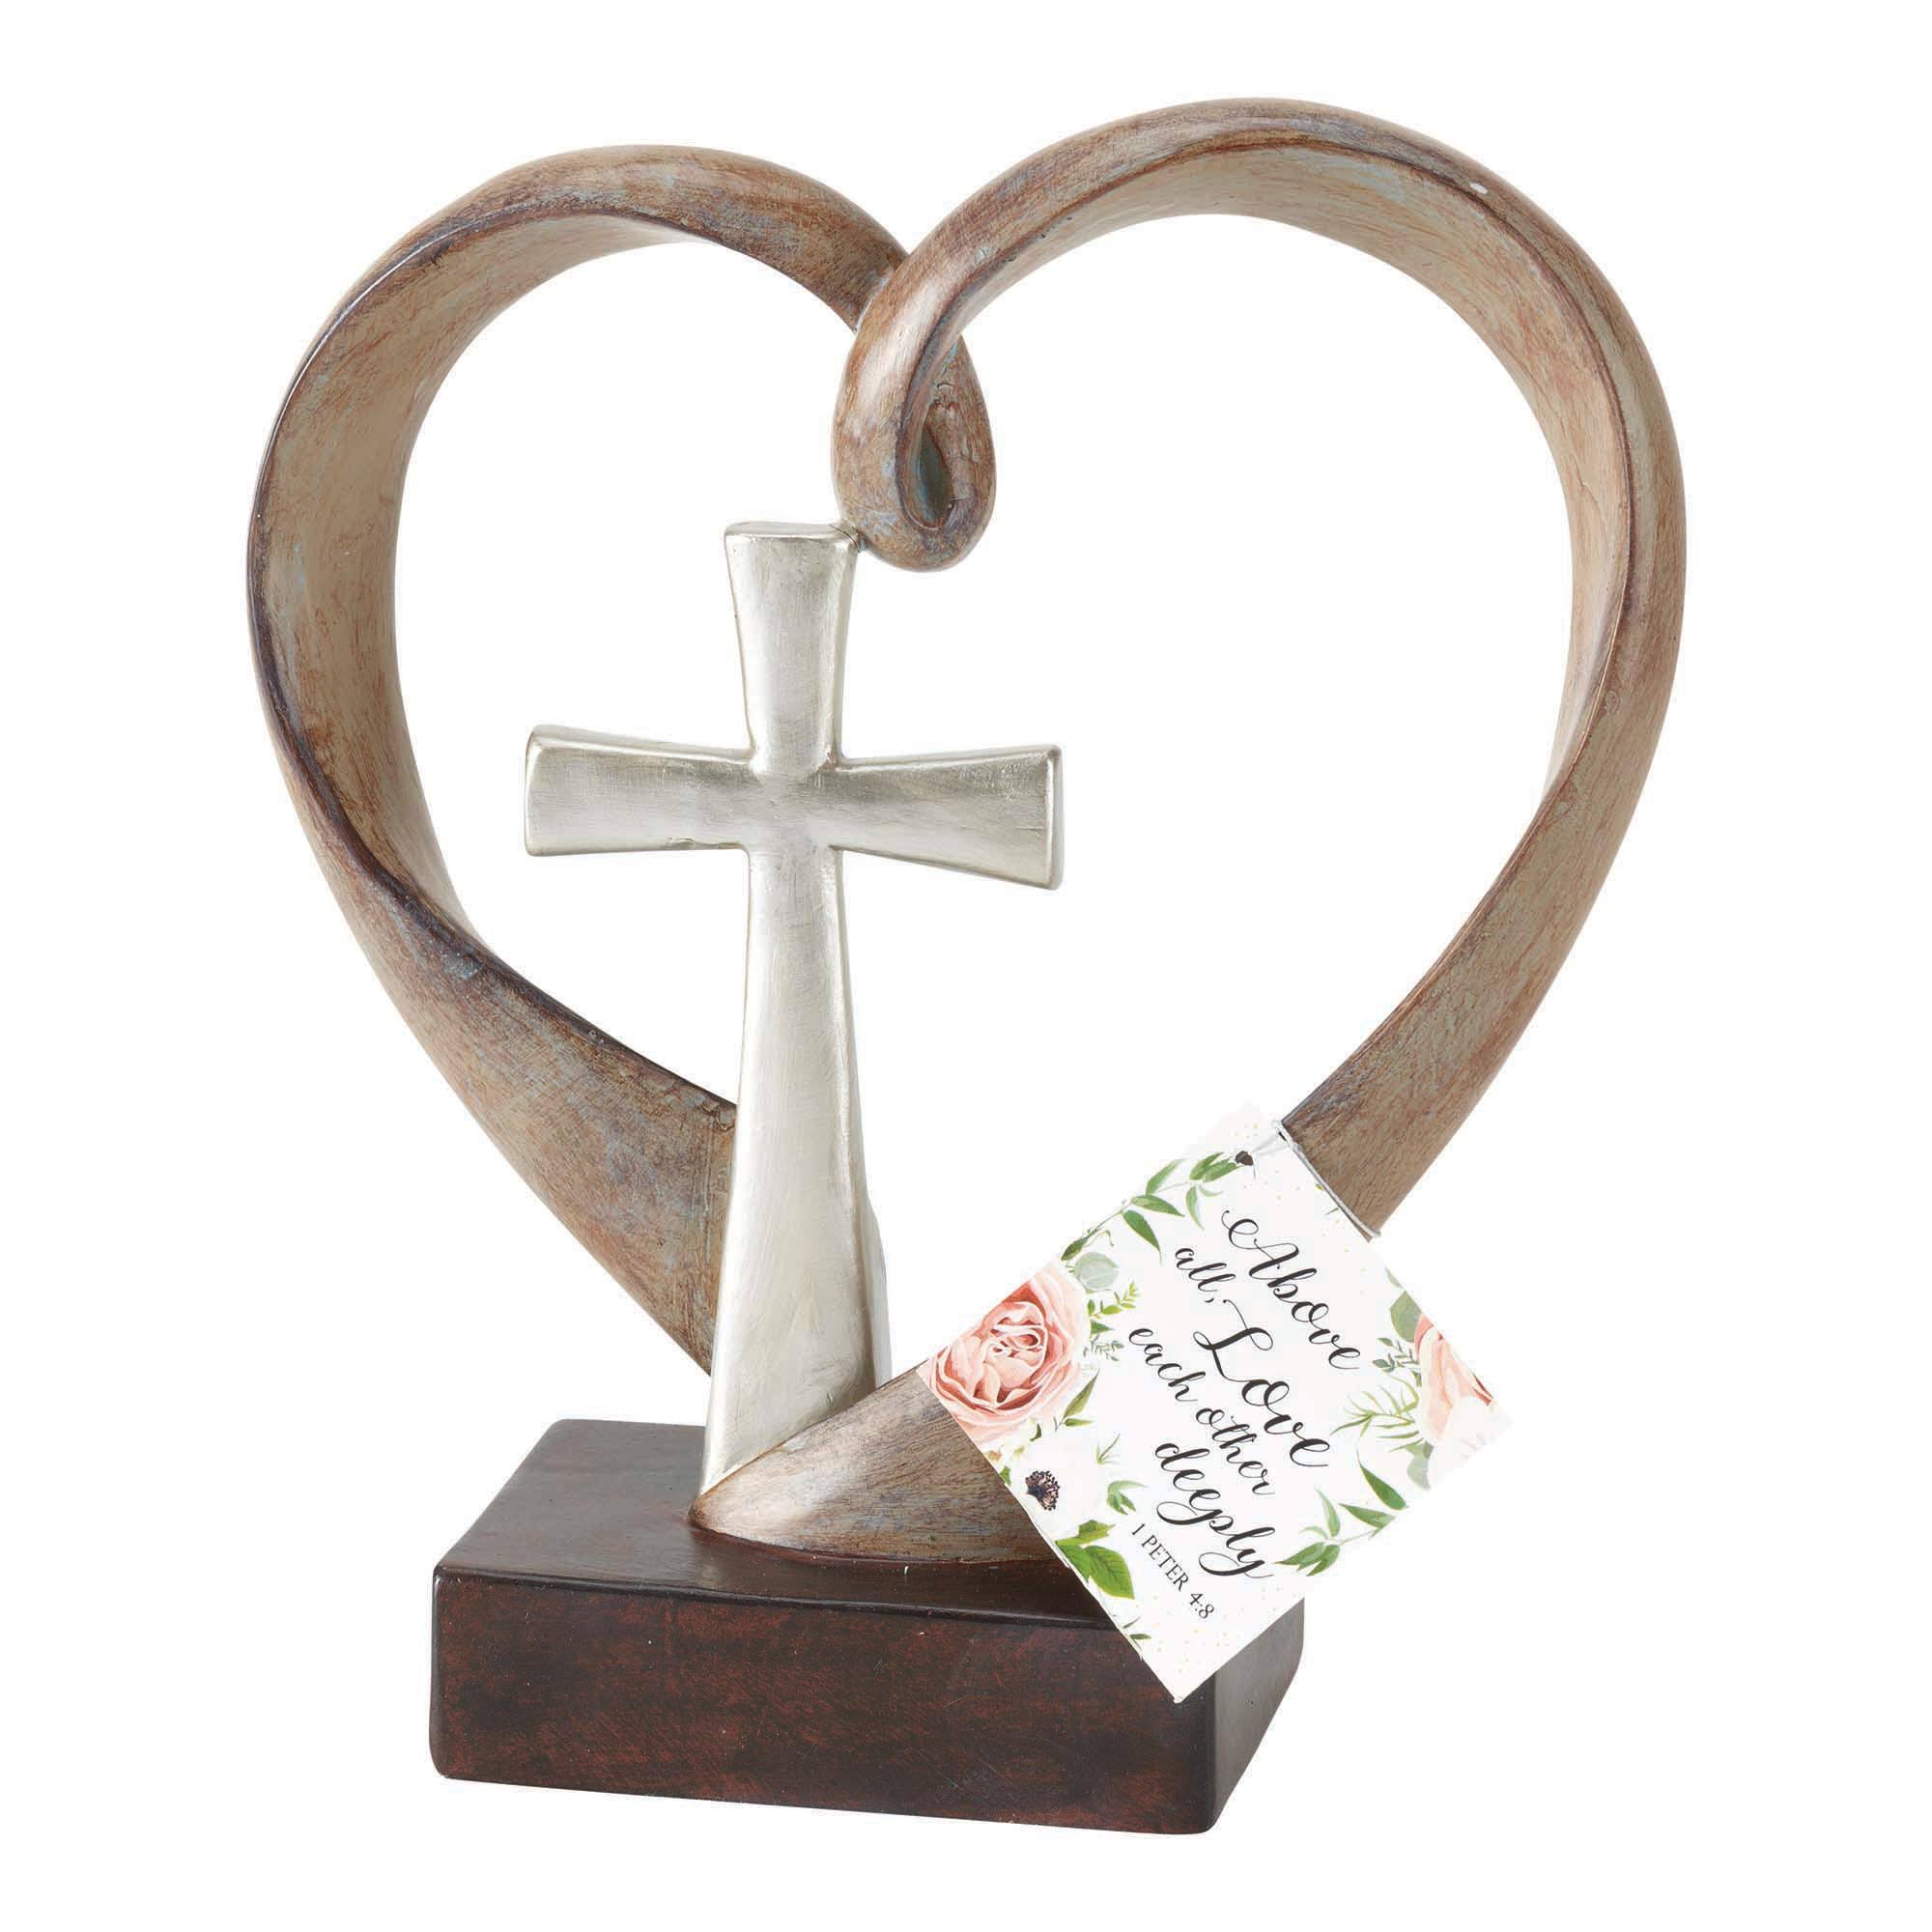 Dicksons Love Each Other Silver Cross 4 x 8 Inch Resin Stone Tabletop Cross